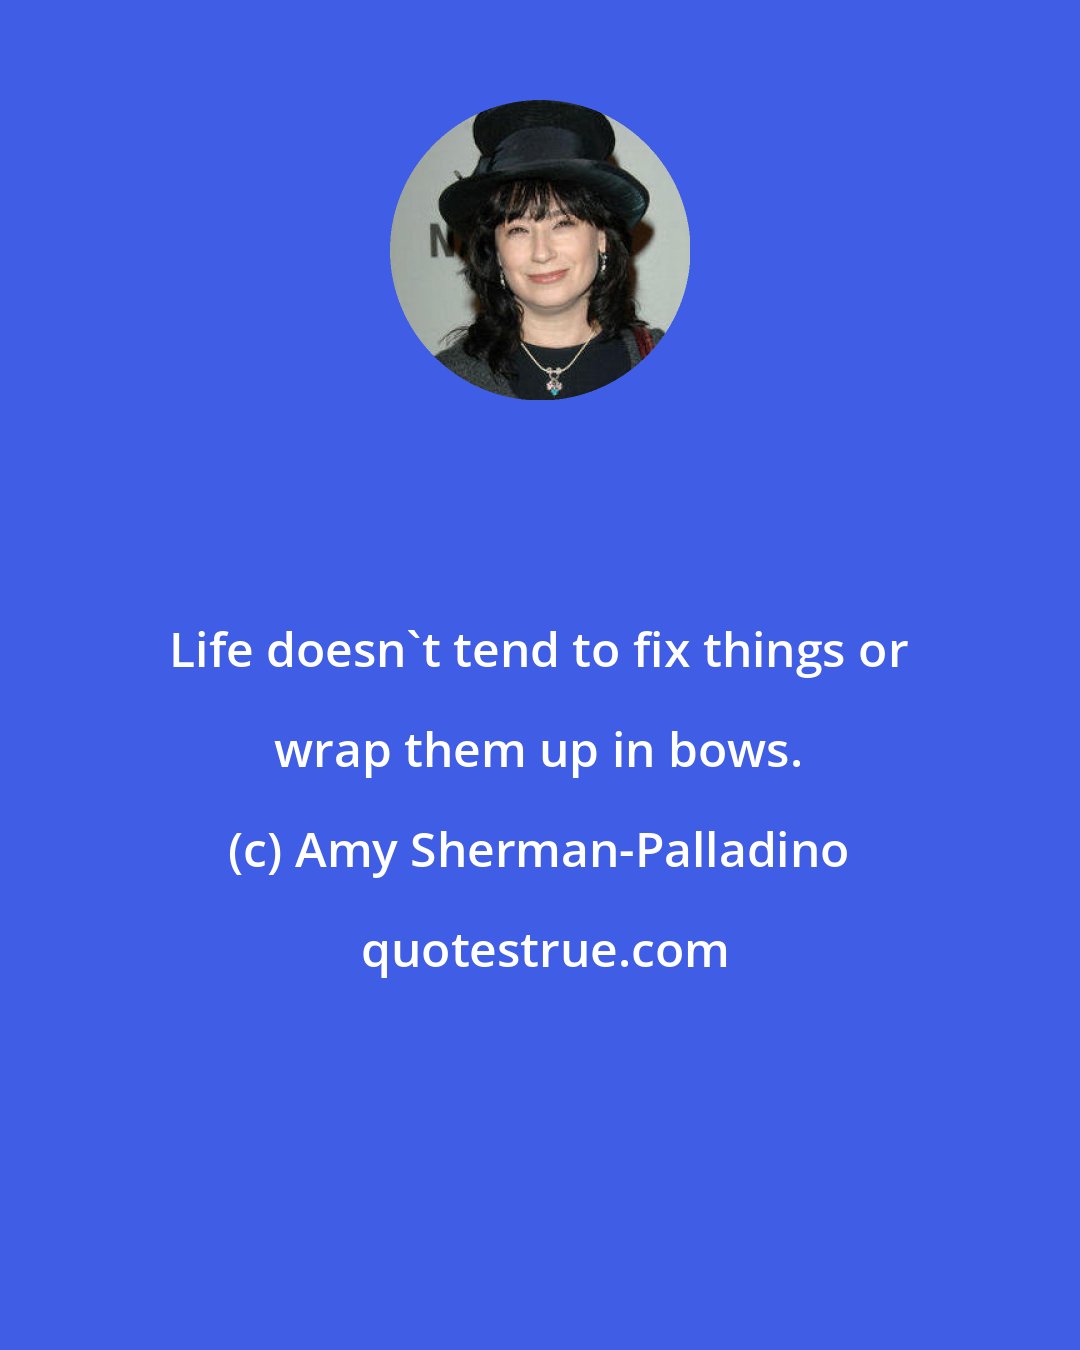 Amy Sherman-Palladino: Life doesn't tend to fix things or wrap them up in bows.